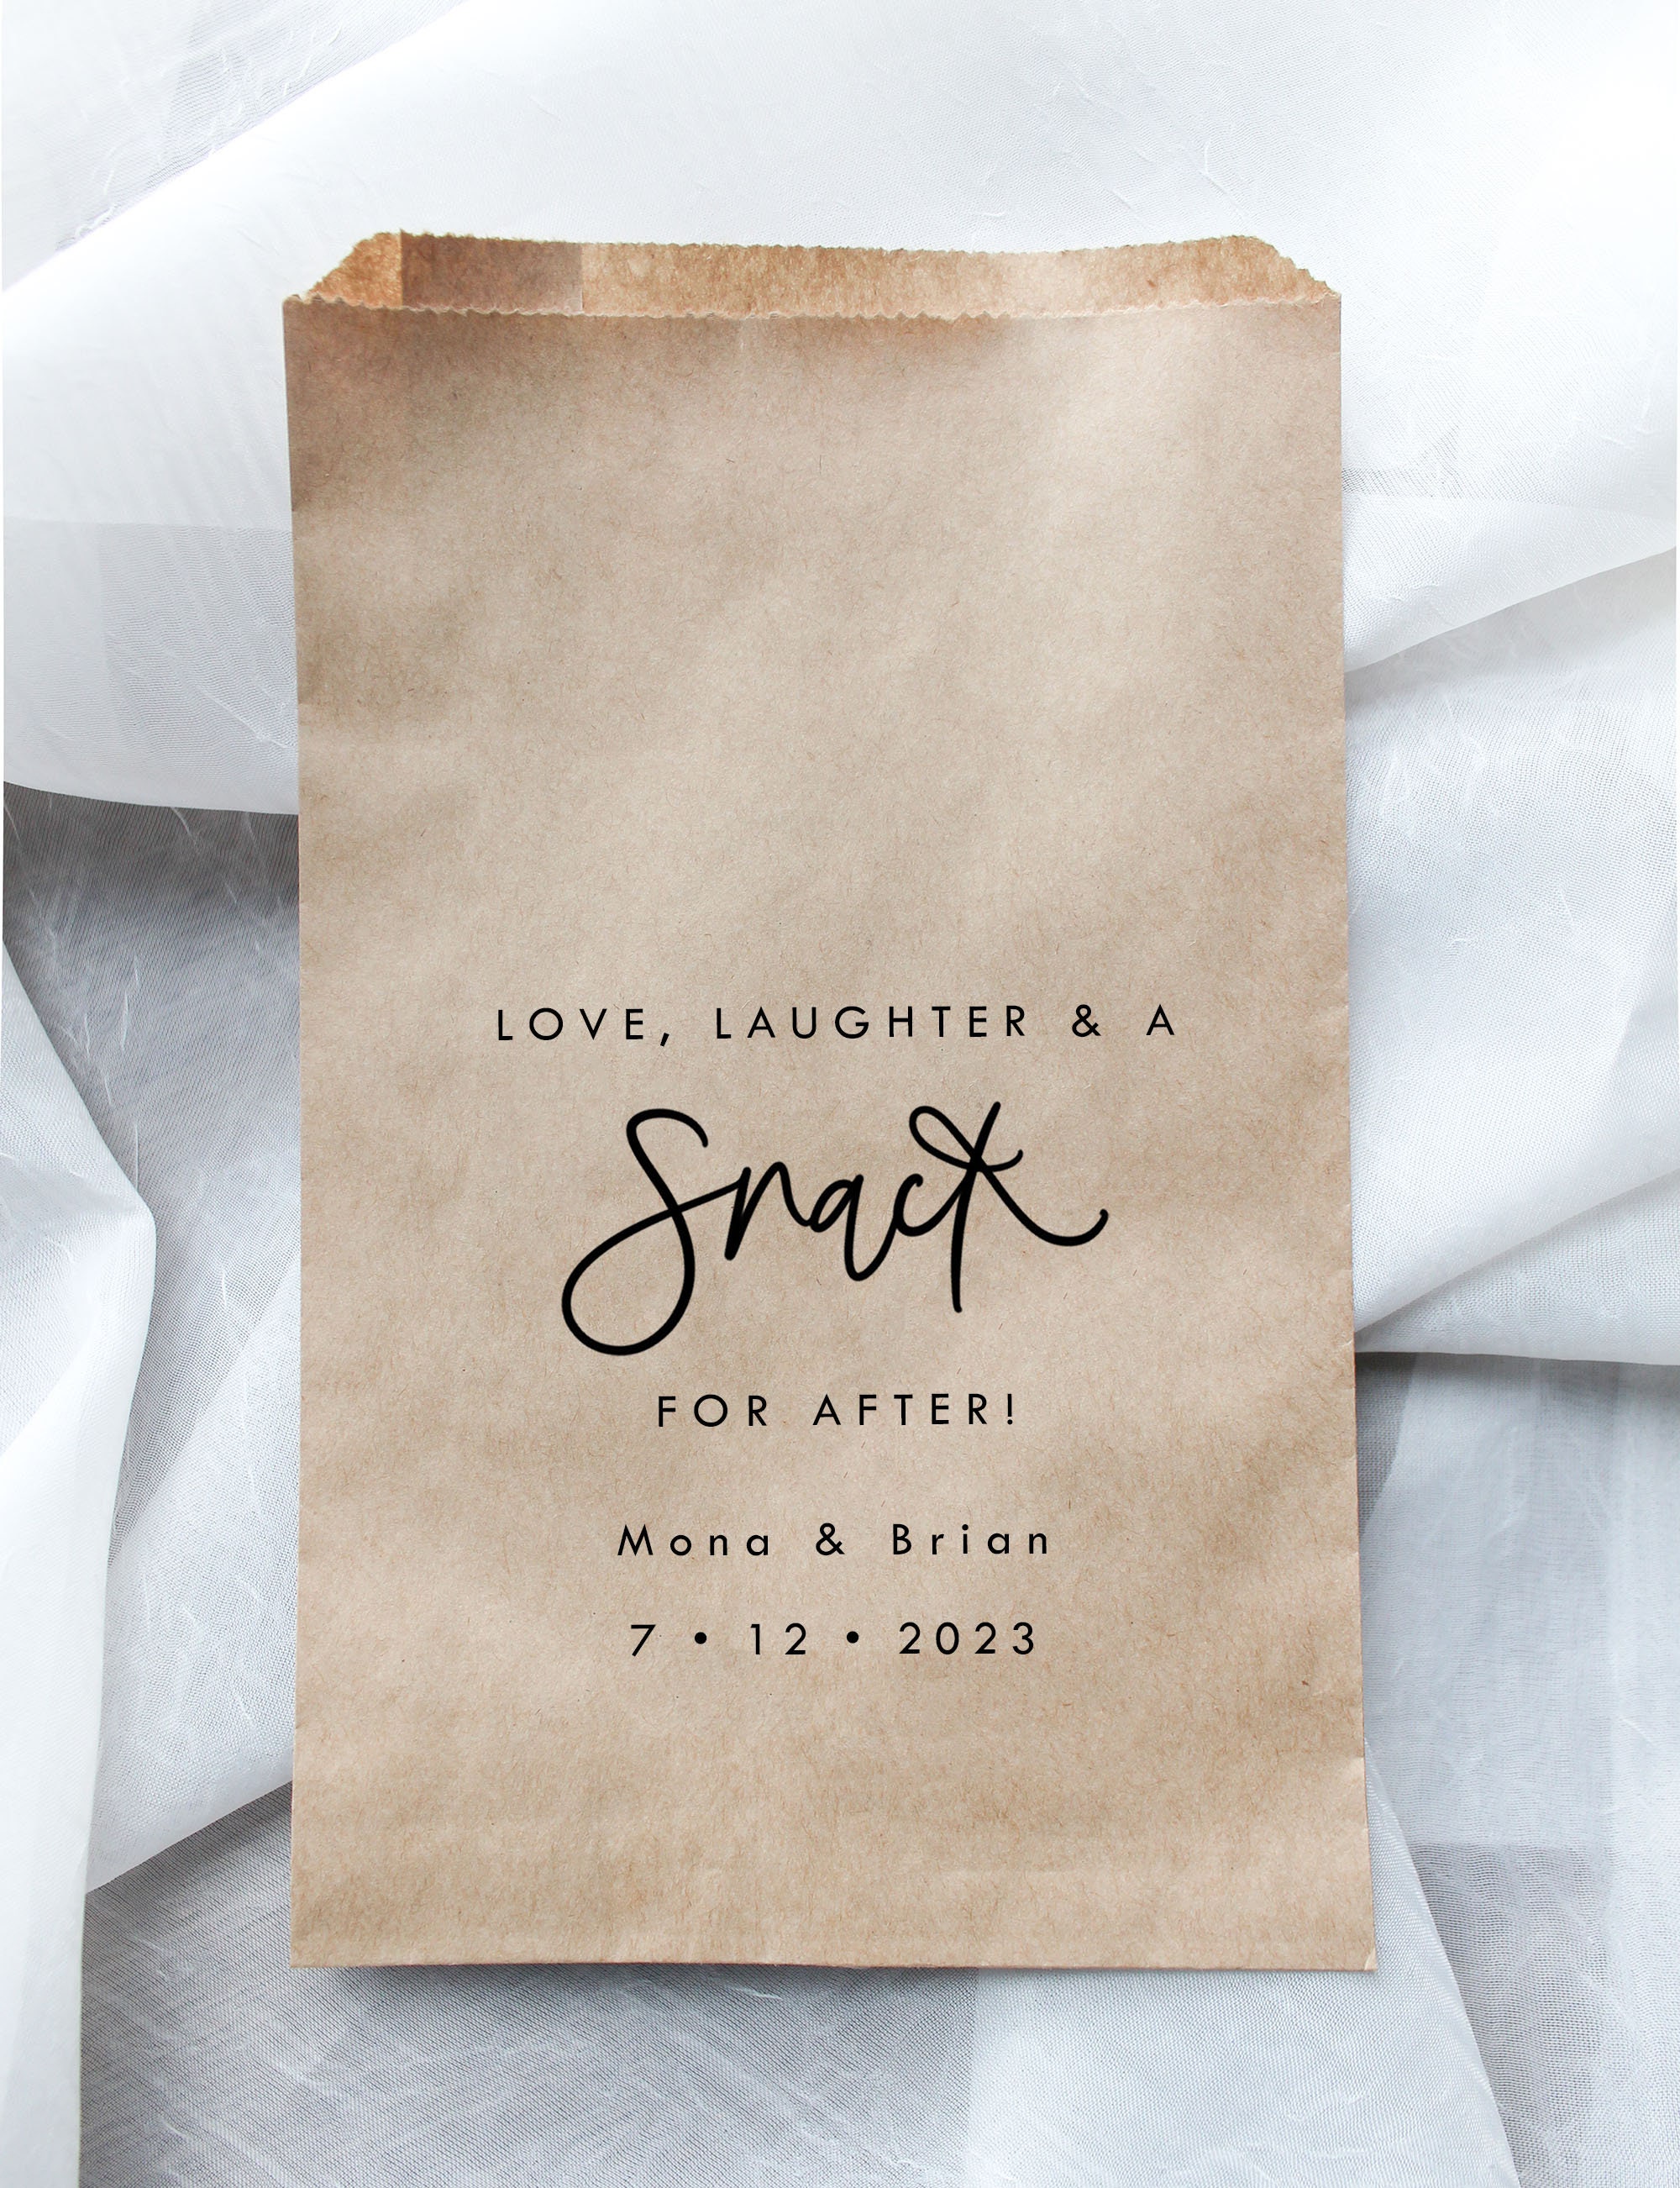 Love Laughter and a Snack for After Favor Bags Popcorn - Etsy